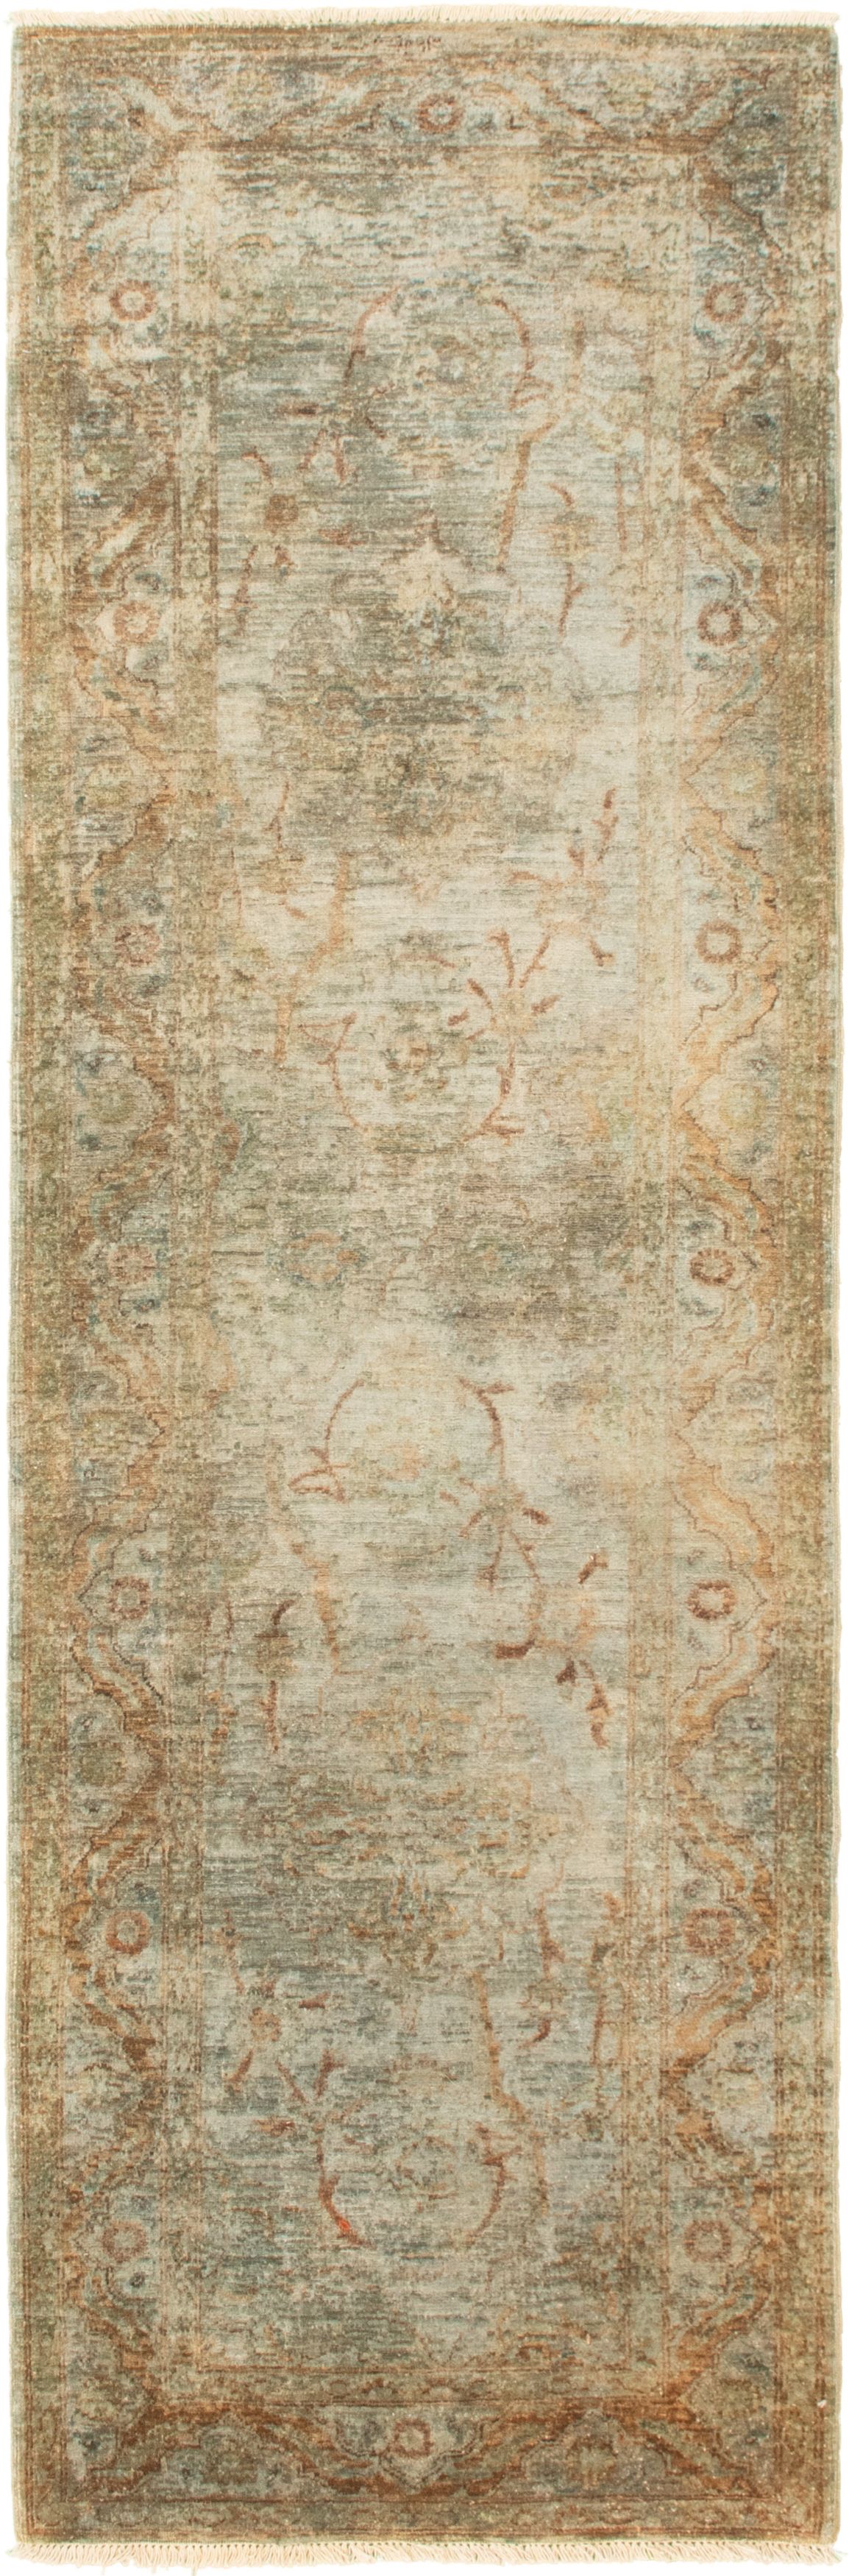 Hand-knotted Color Transition Turquoise Wool Rug 3'0" x 9'9" Size: 3'0" x 9'9"  